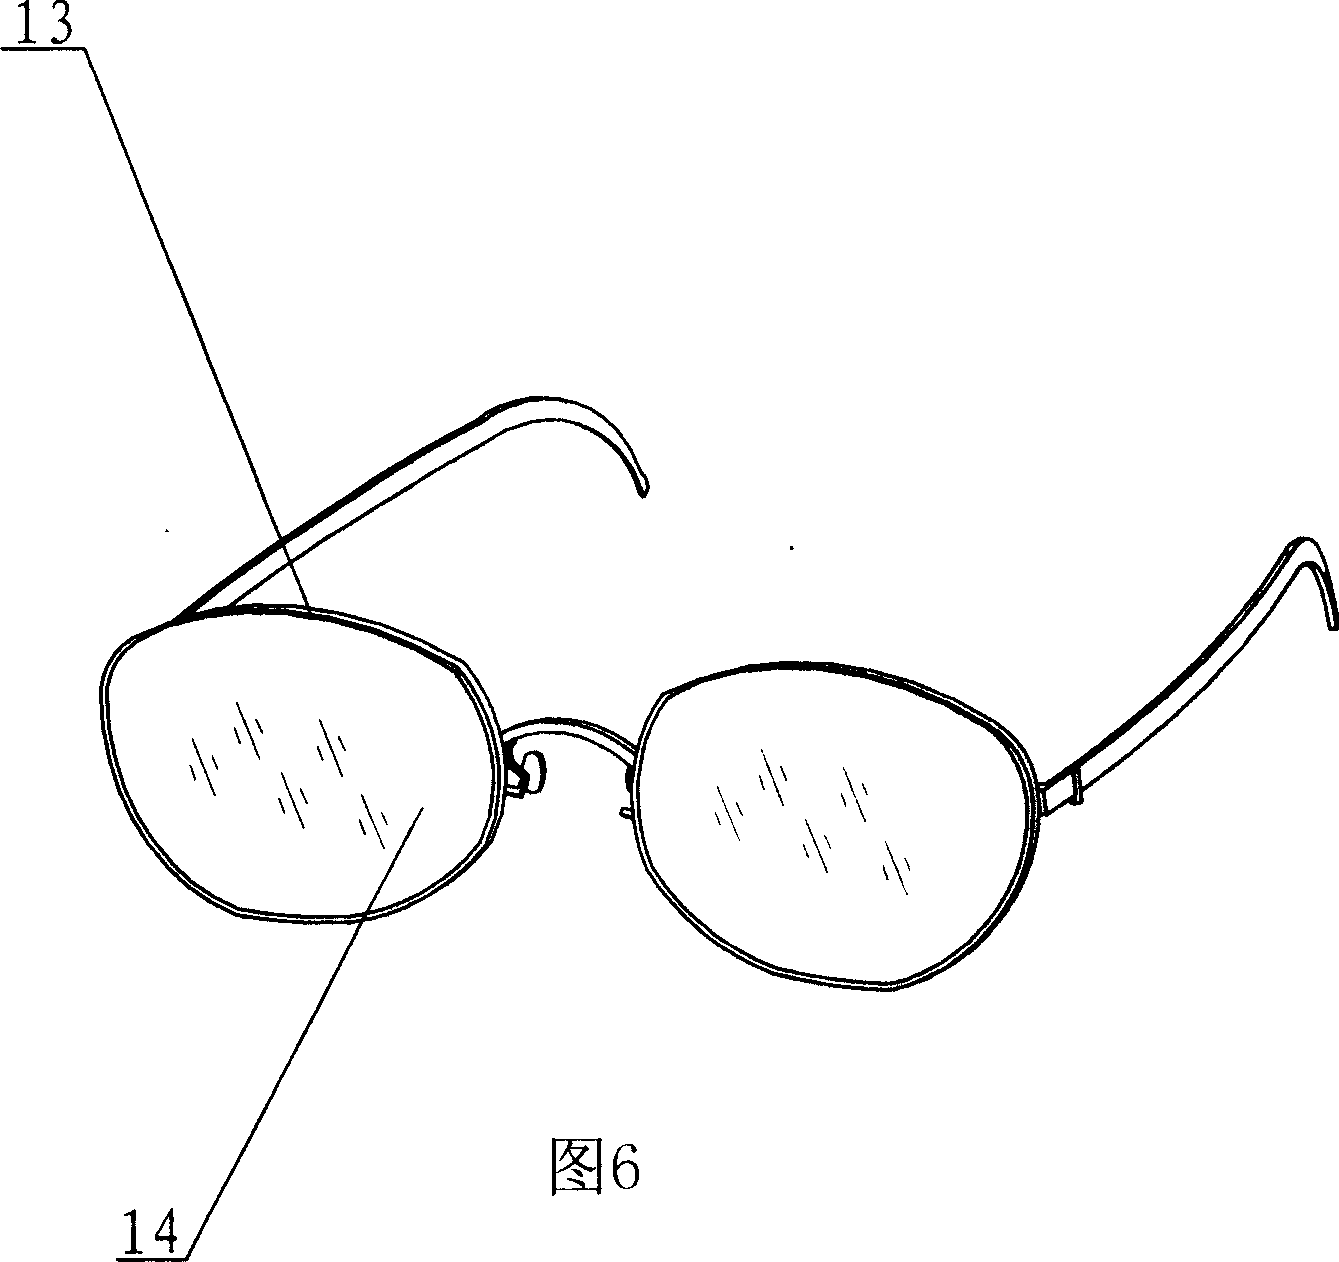 Detector for detecting binocular vision unequal images